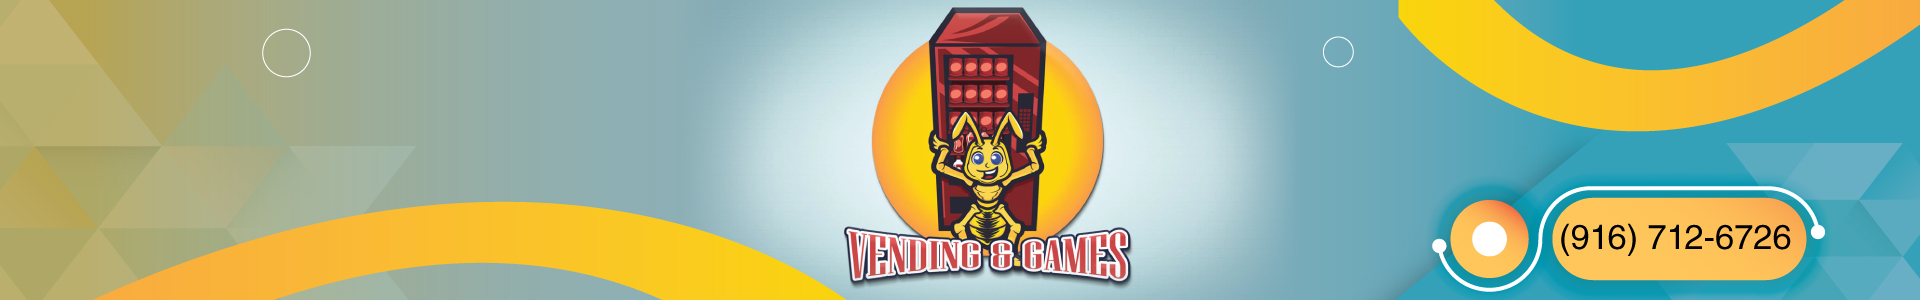 Header - Vending And Games Machines